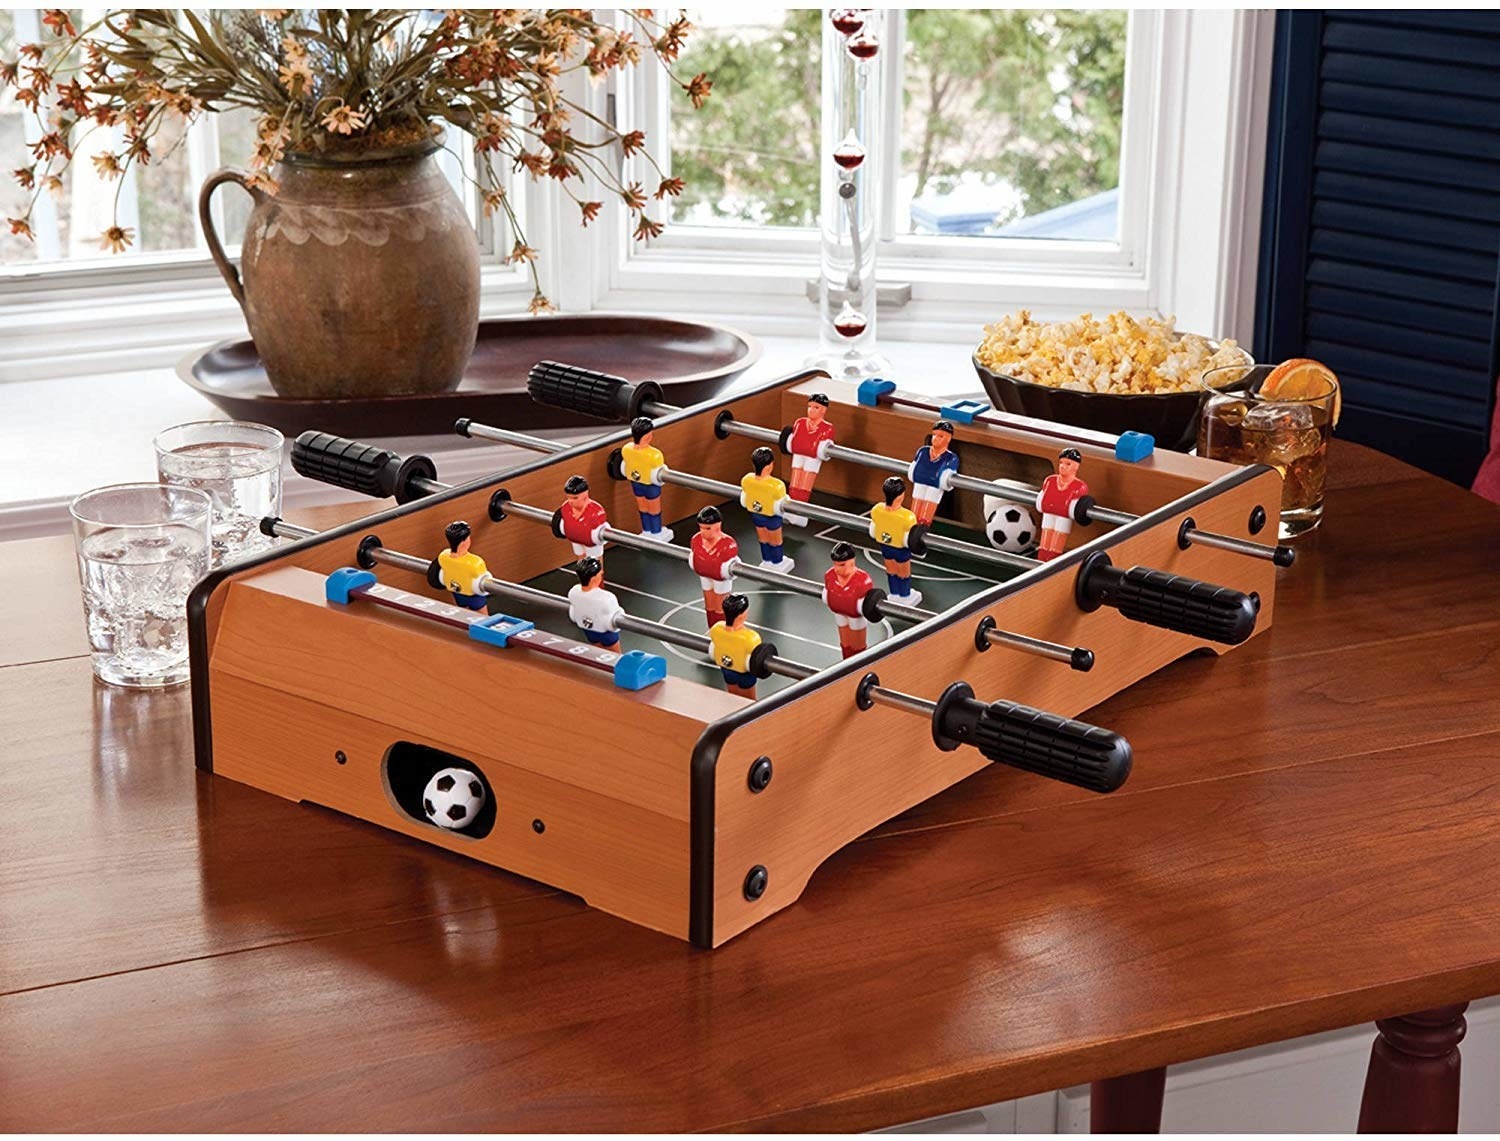 Foosball table kept on a dining table beside popcorn and drinks.